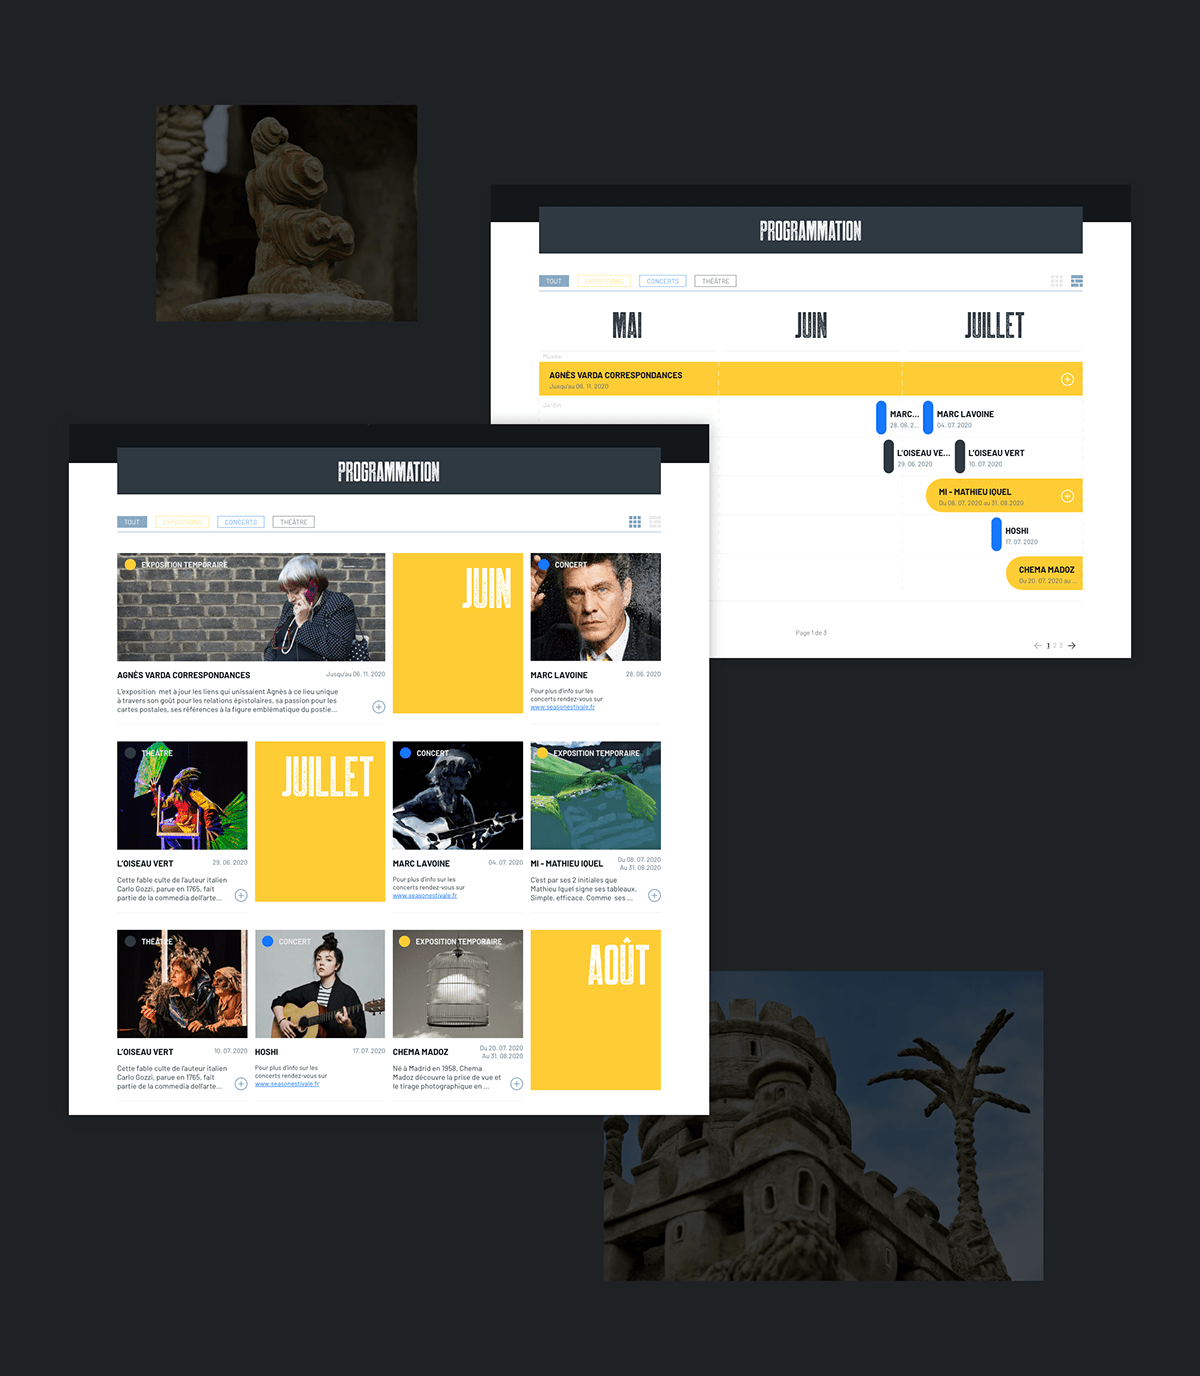 Cultural events mobile monument museum programme Responsive UI ux Website website redesign